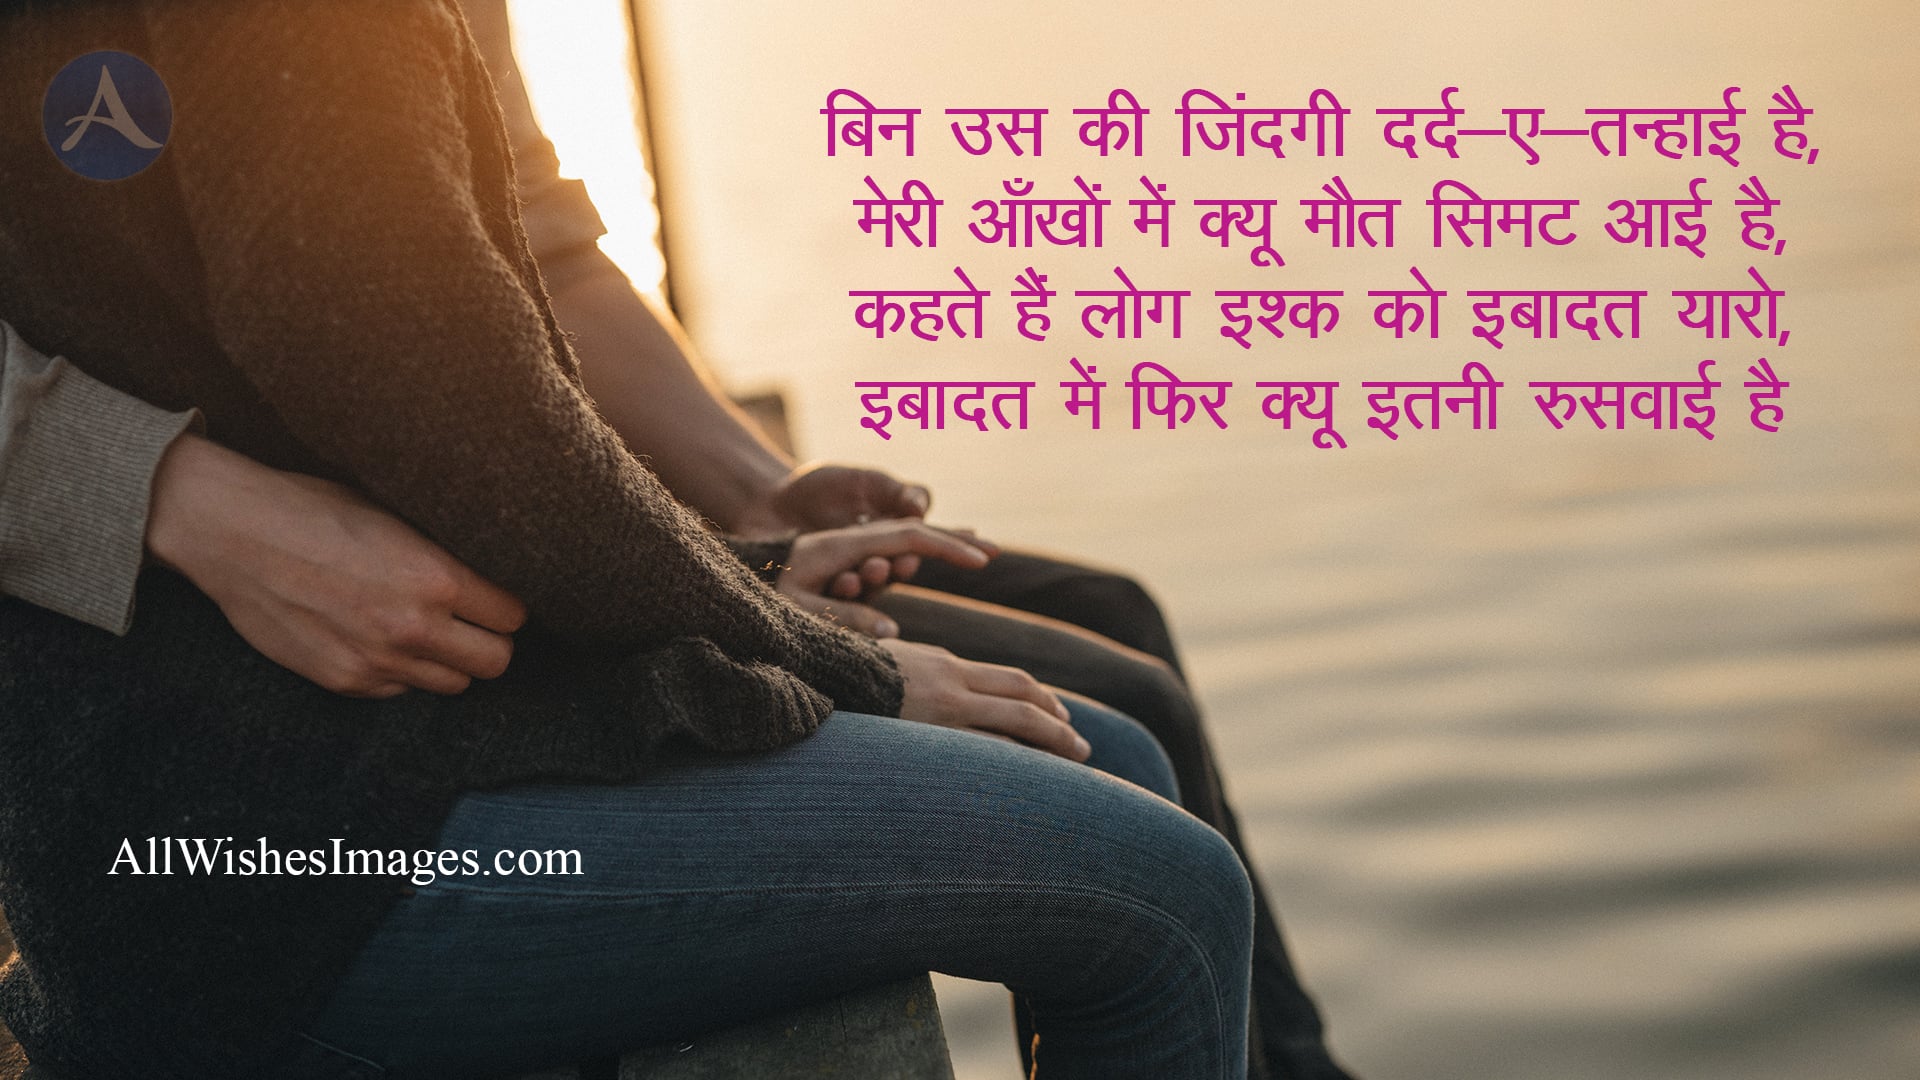 Couples Bewafa Shayari - All Wishes Images - Images for WhatsApp